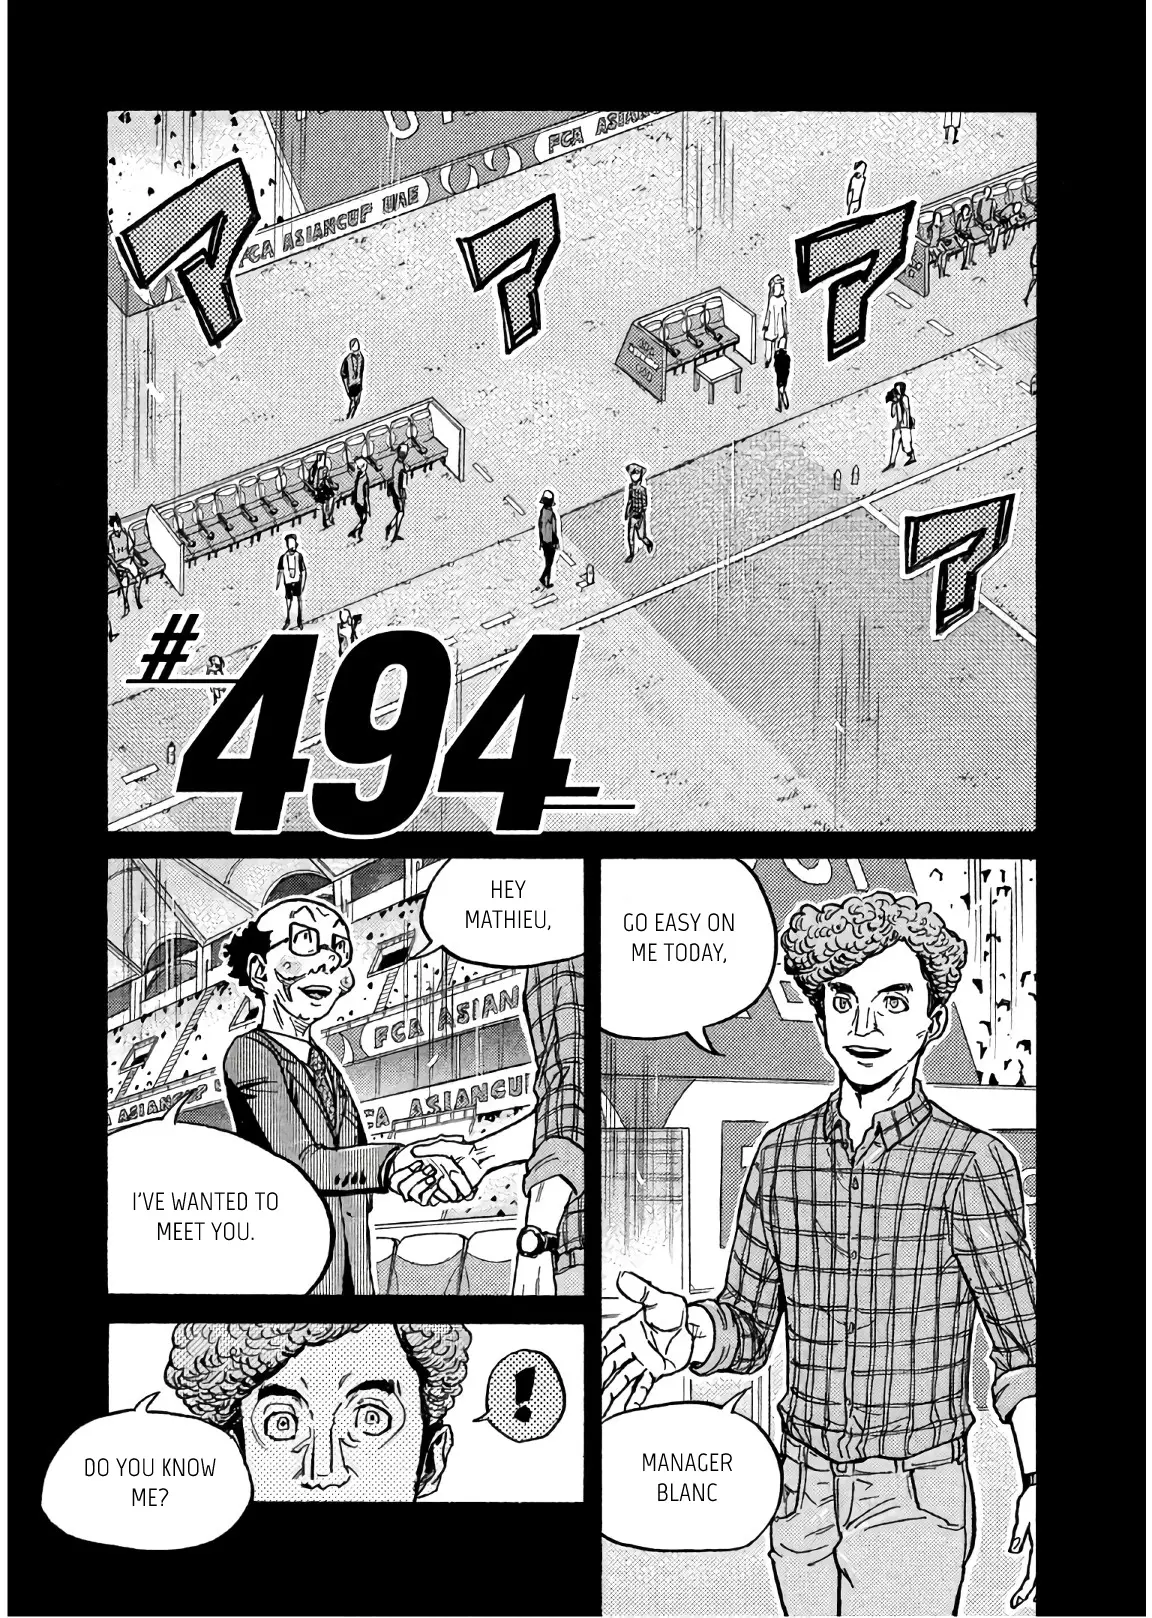 Giant Killing - 494 page 1-7fe6661d